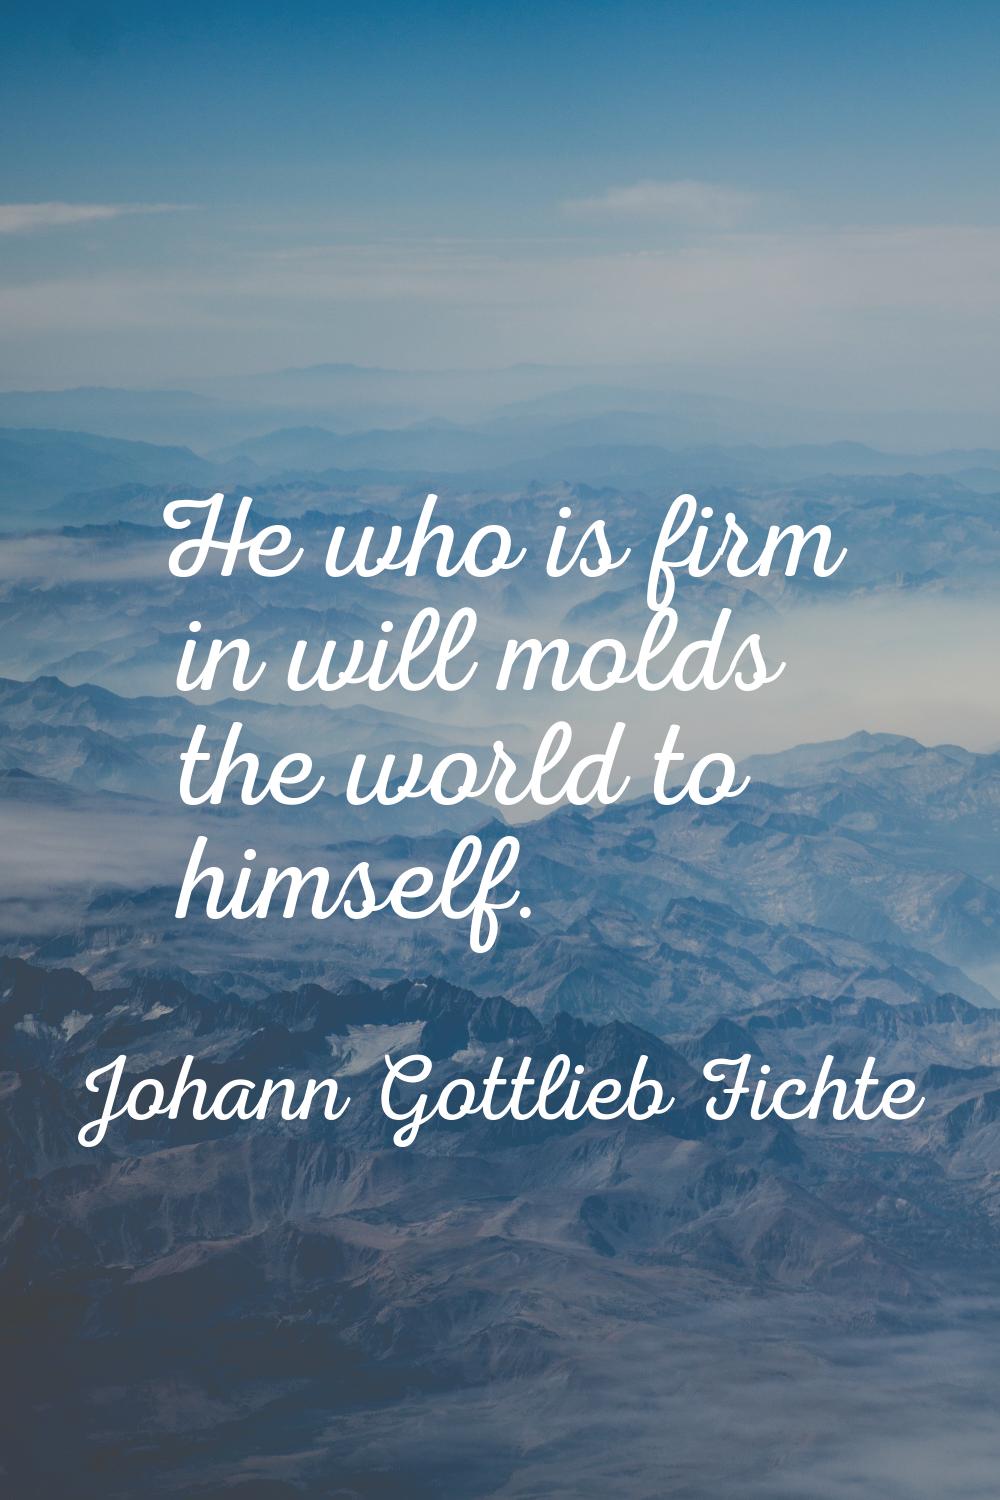 He who is firm in will molds the world to himself.